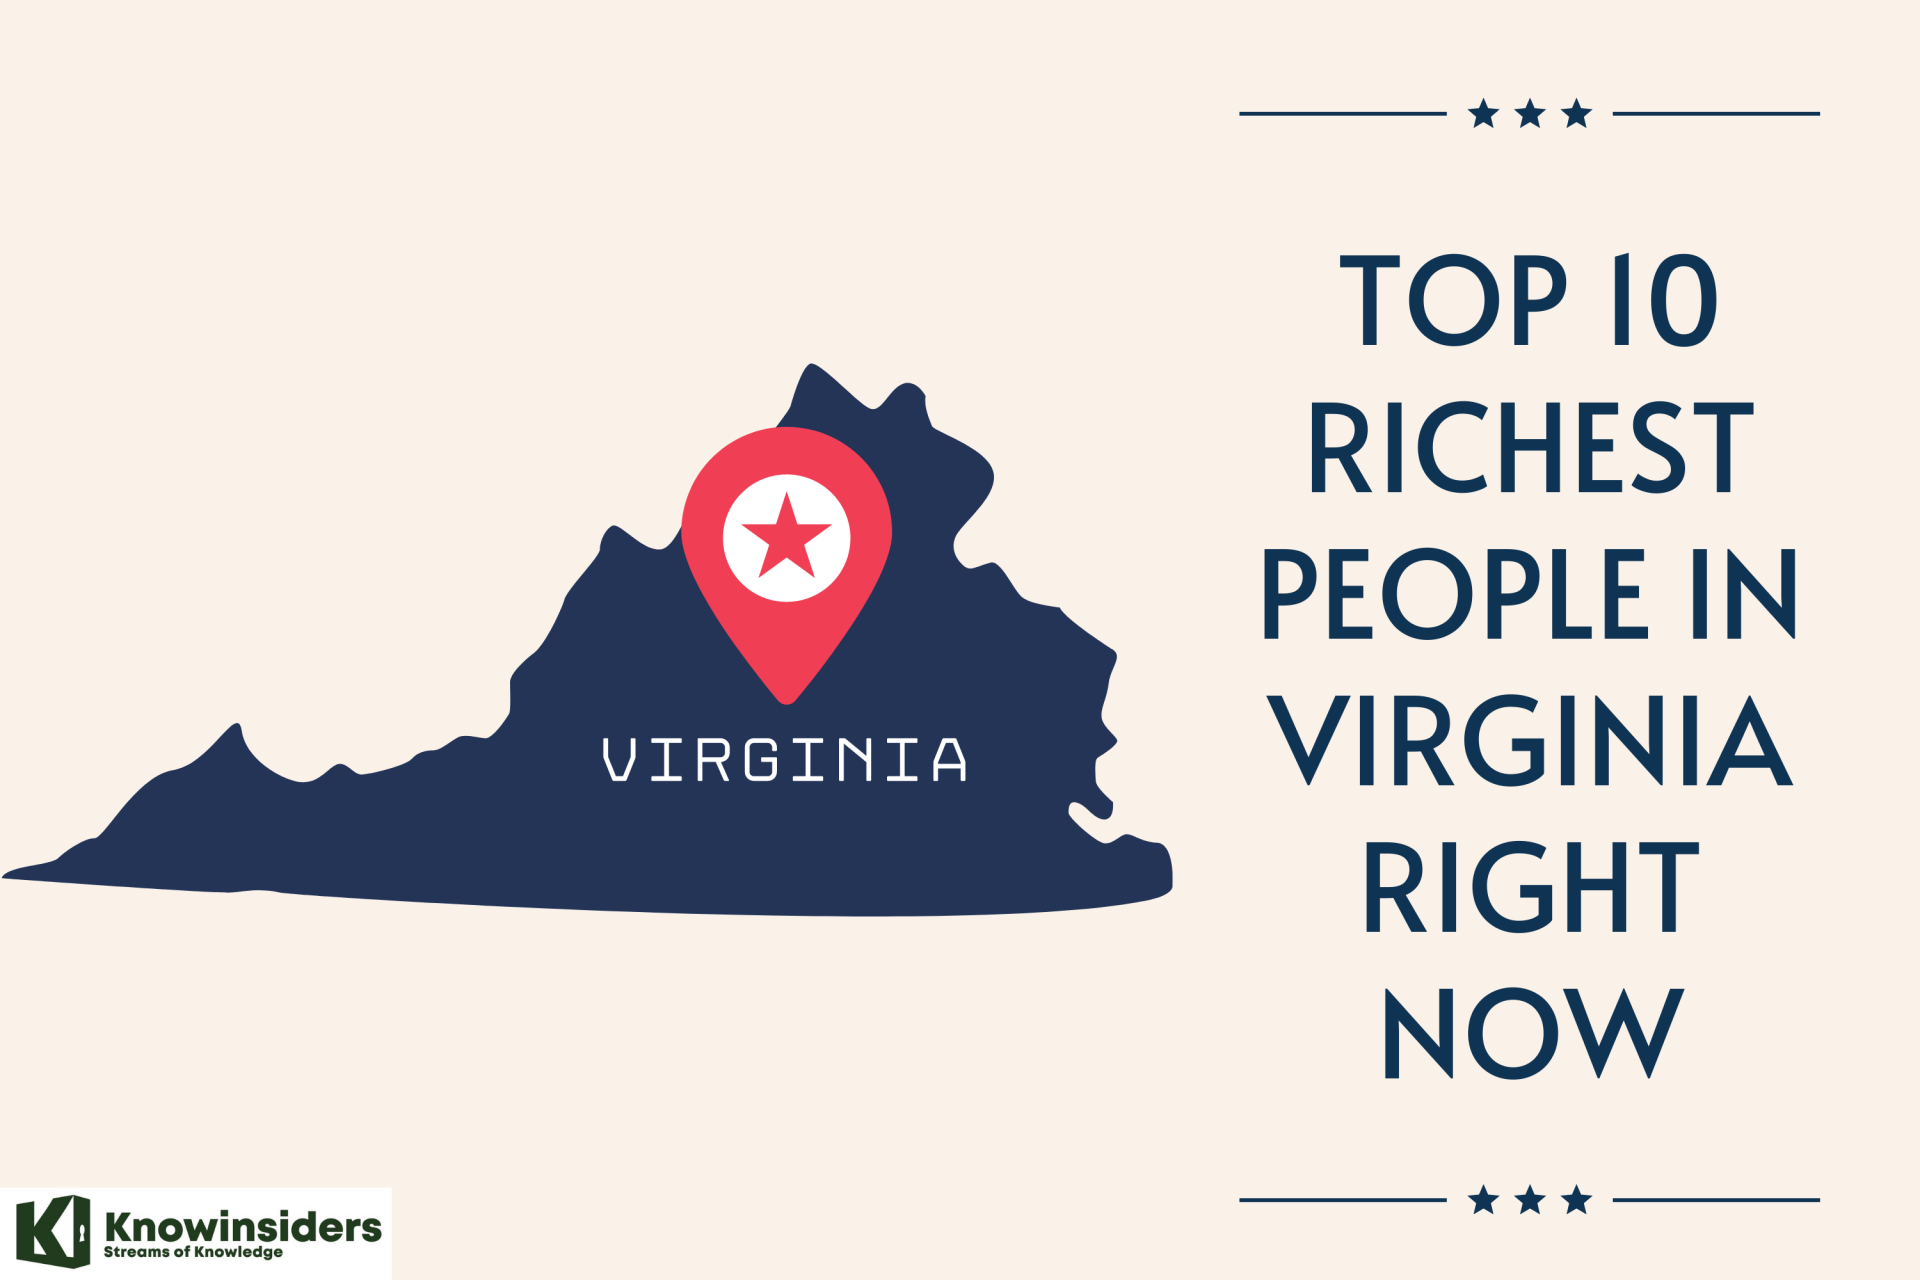 Top 10 Richest People in Virginia Right Now